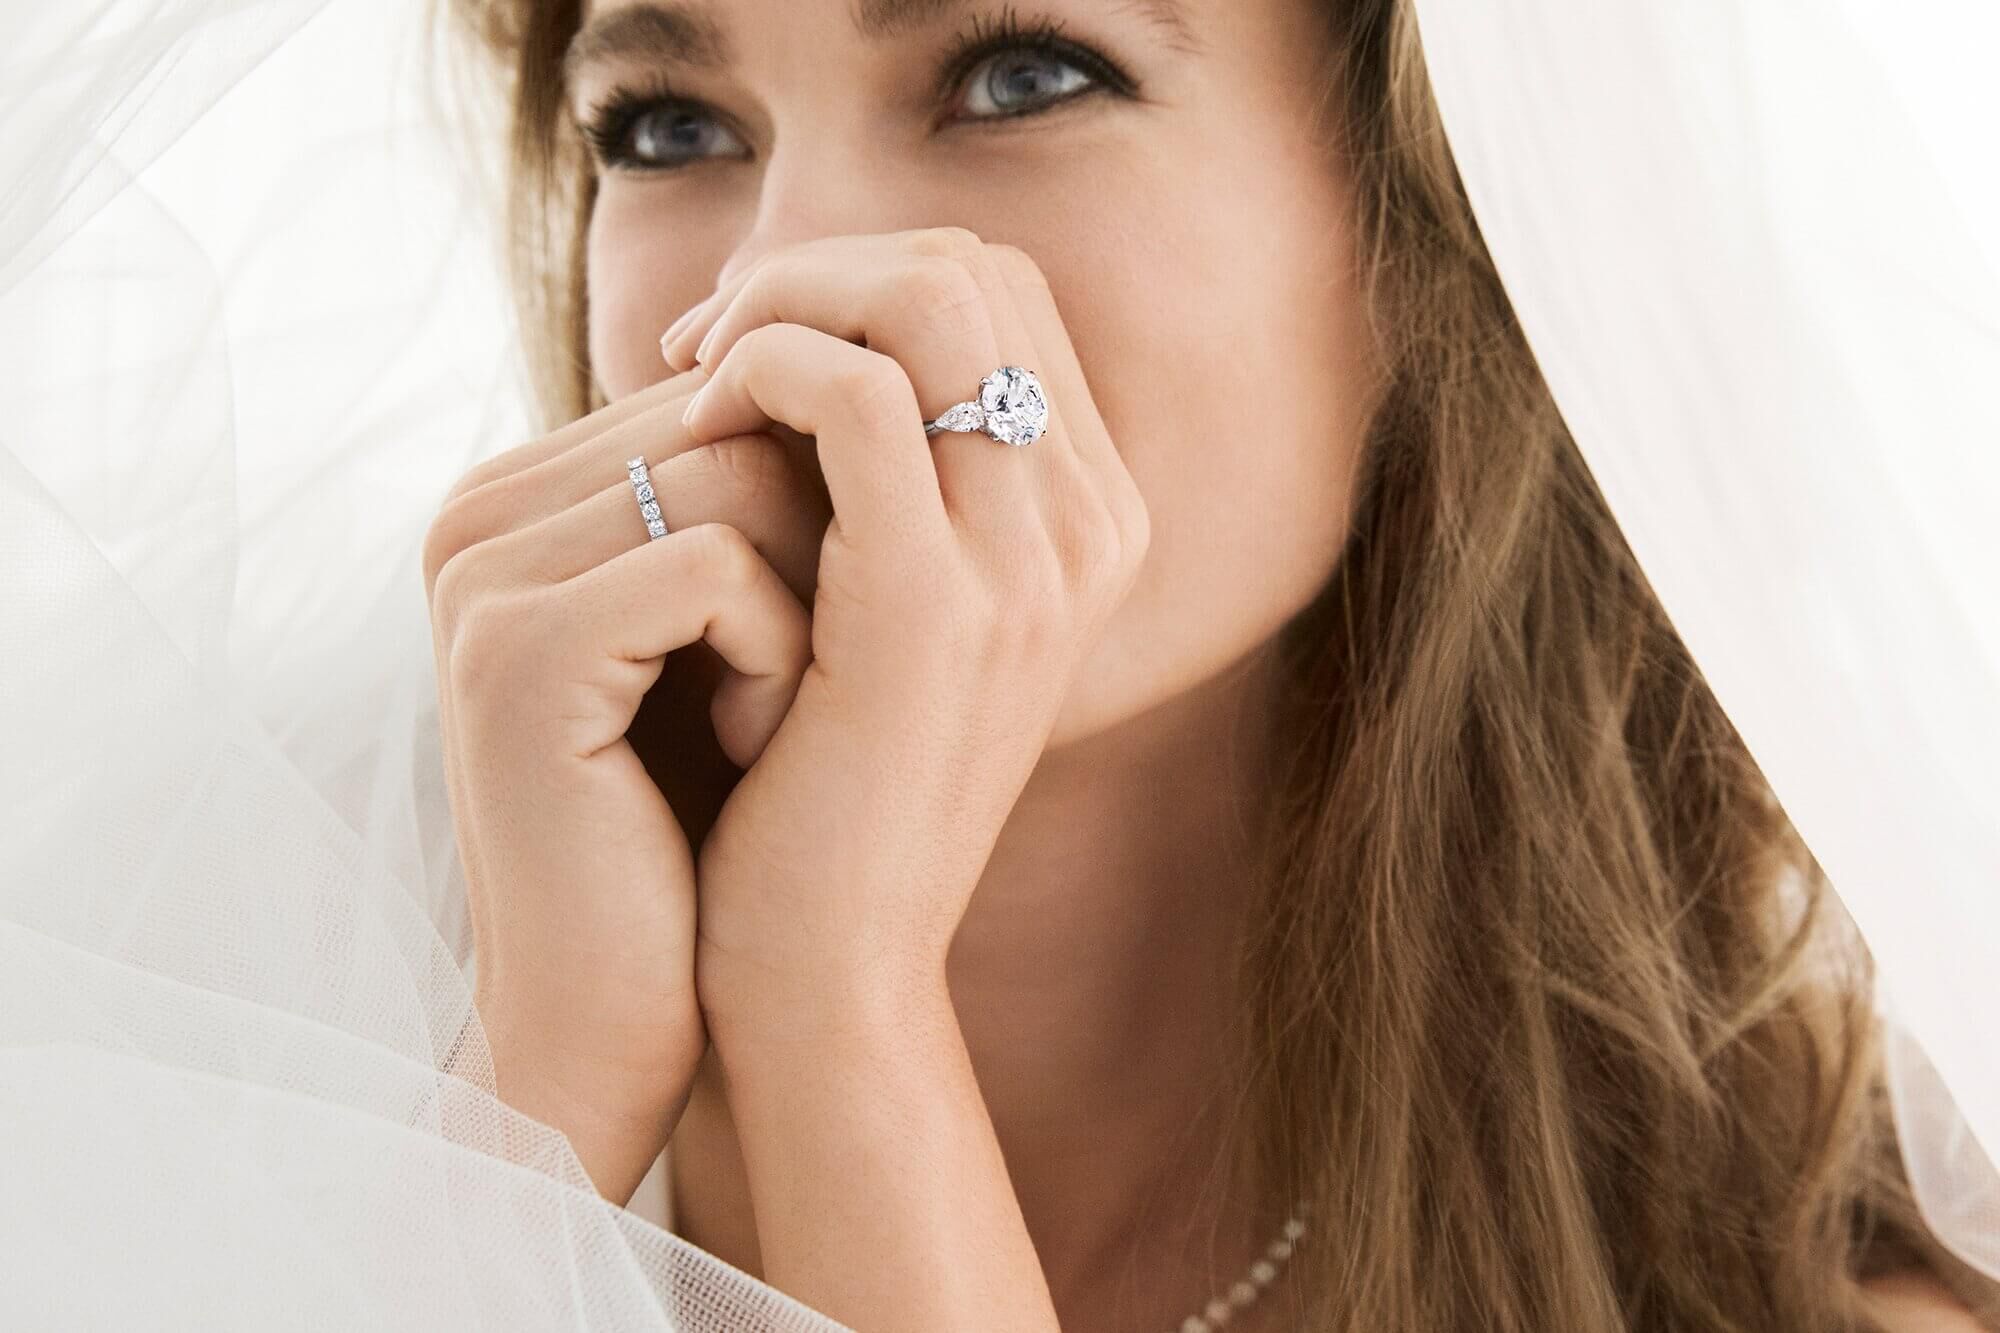 Model bride wears Promise Round Diamond Engagement Ring with pear shaped side stones and Castle Set Round Diamond Wedding Band from the Graff bridal collection.